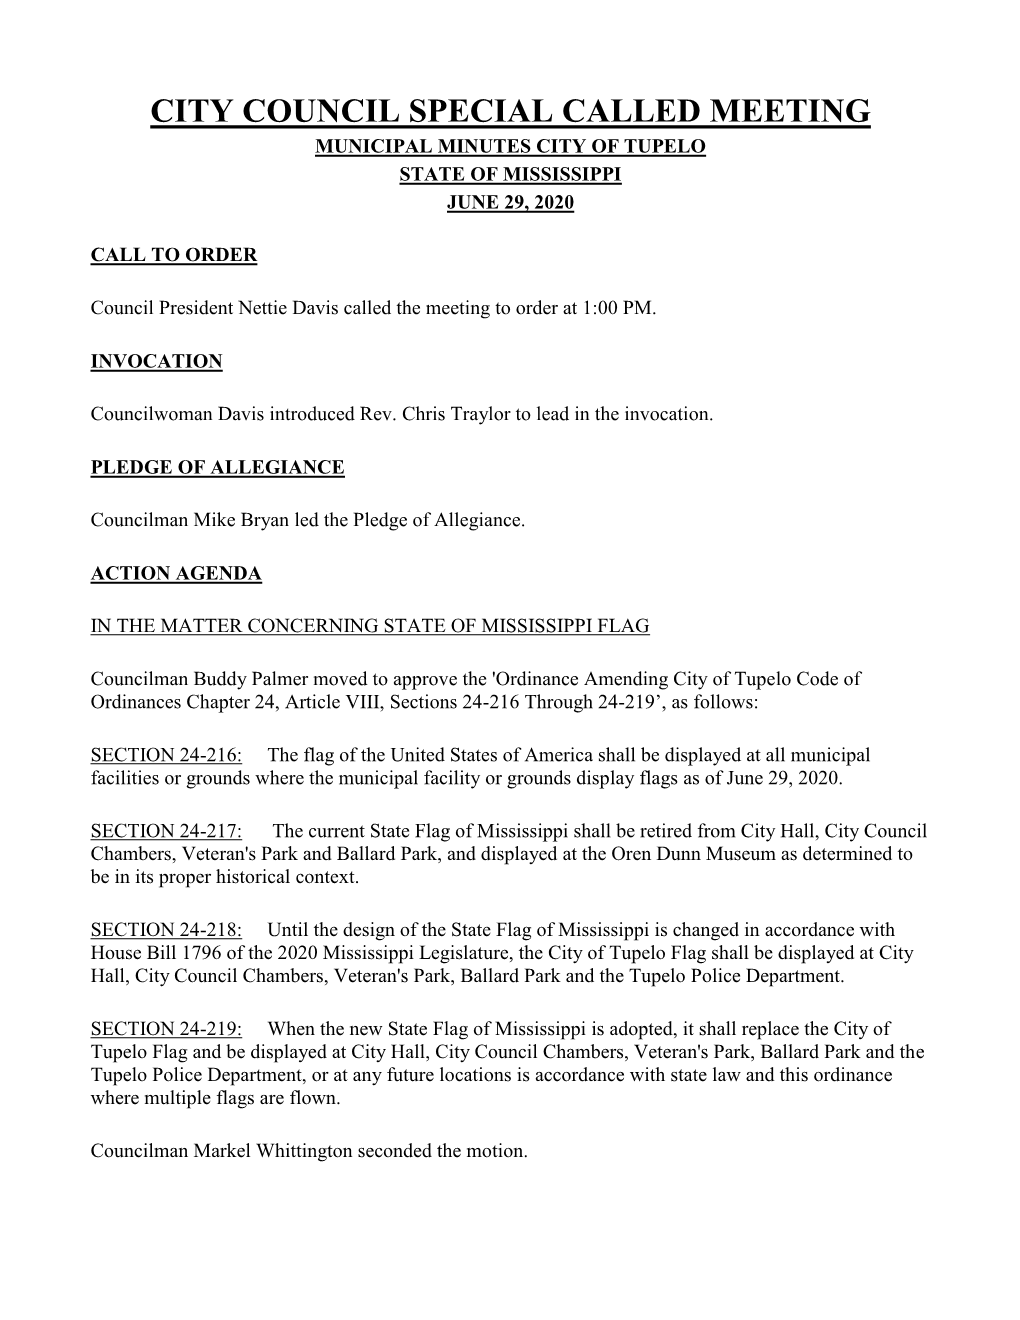 City Council Special Called Meeting Municipal Minutes City of Tupelo State of Mississippi June 29, 2020